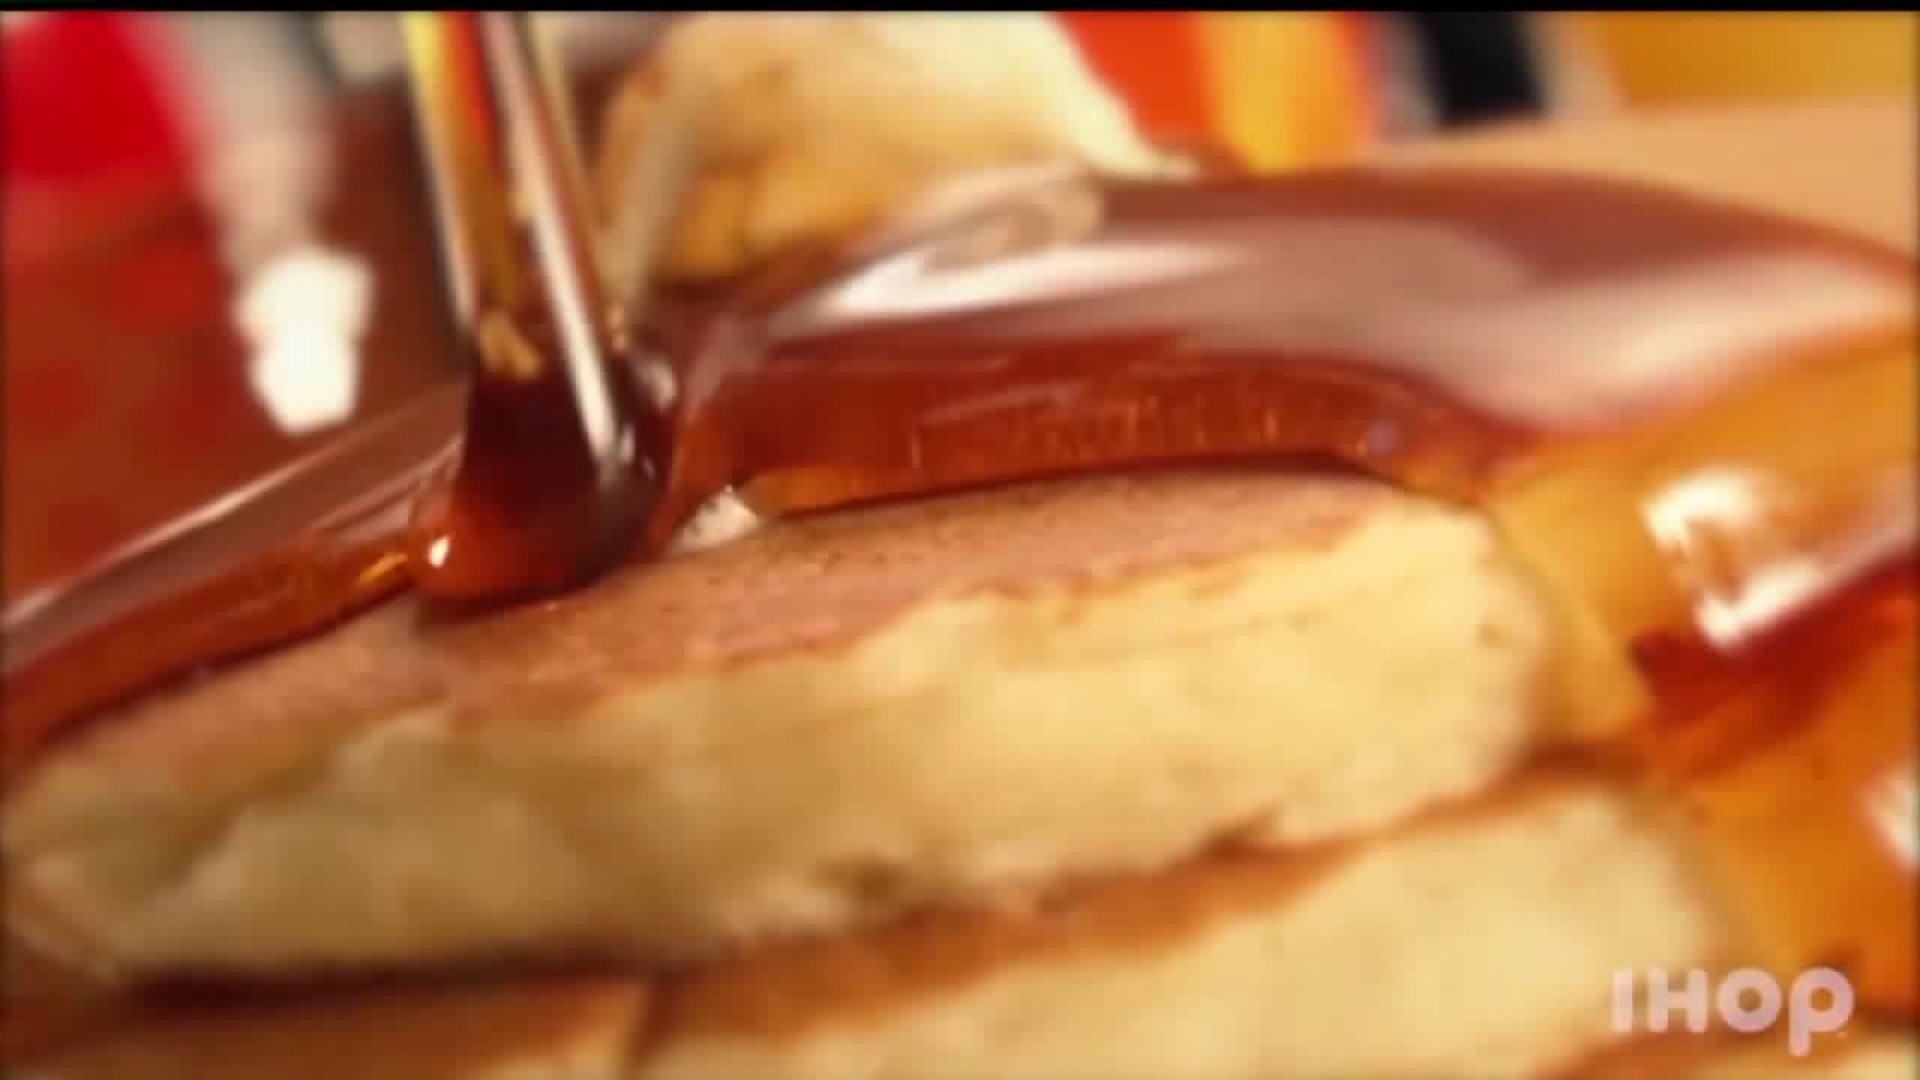 Tuesday, March 1 marks National Pancake Day and IHOP is among the select food chains are celebrating with limited time deals and promotions.